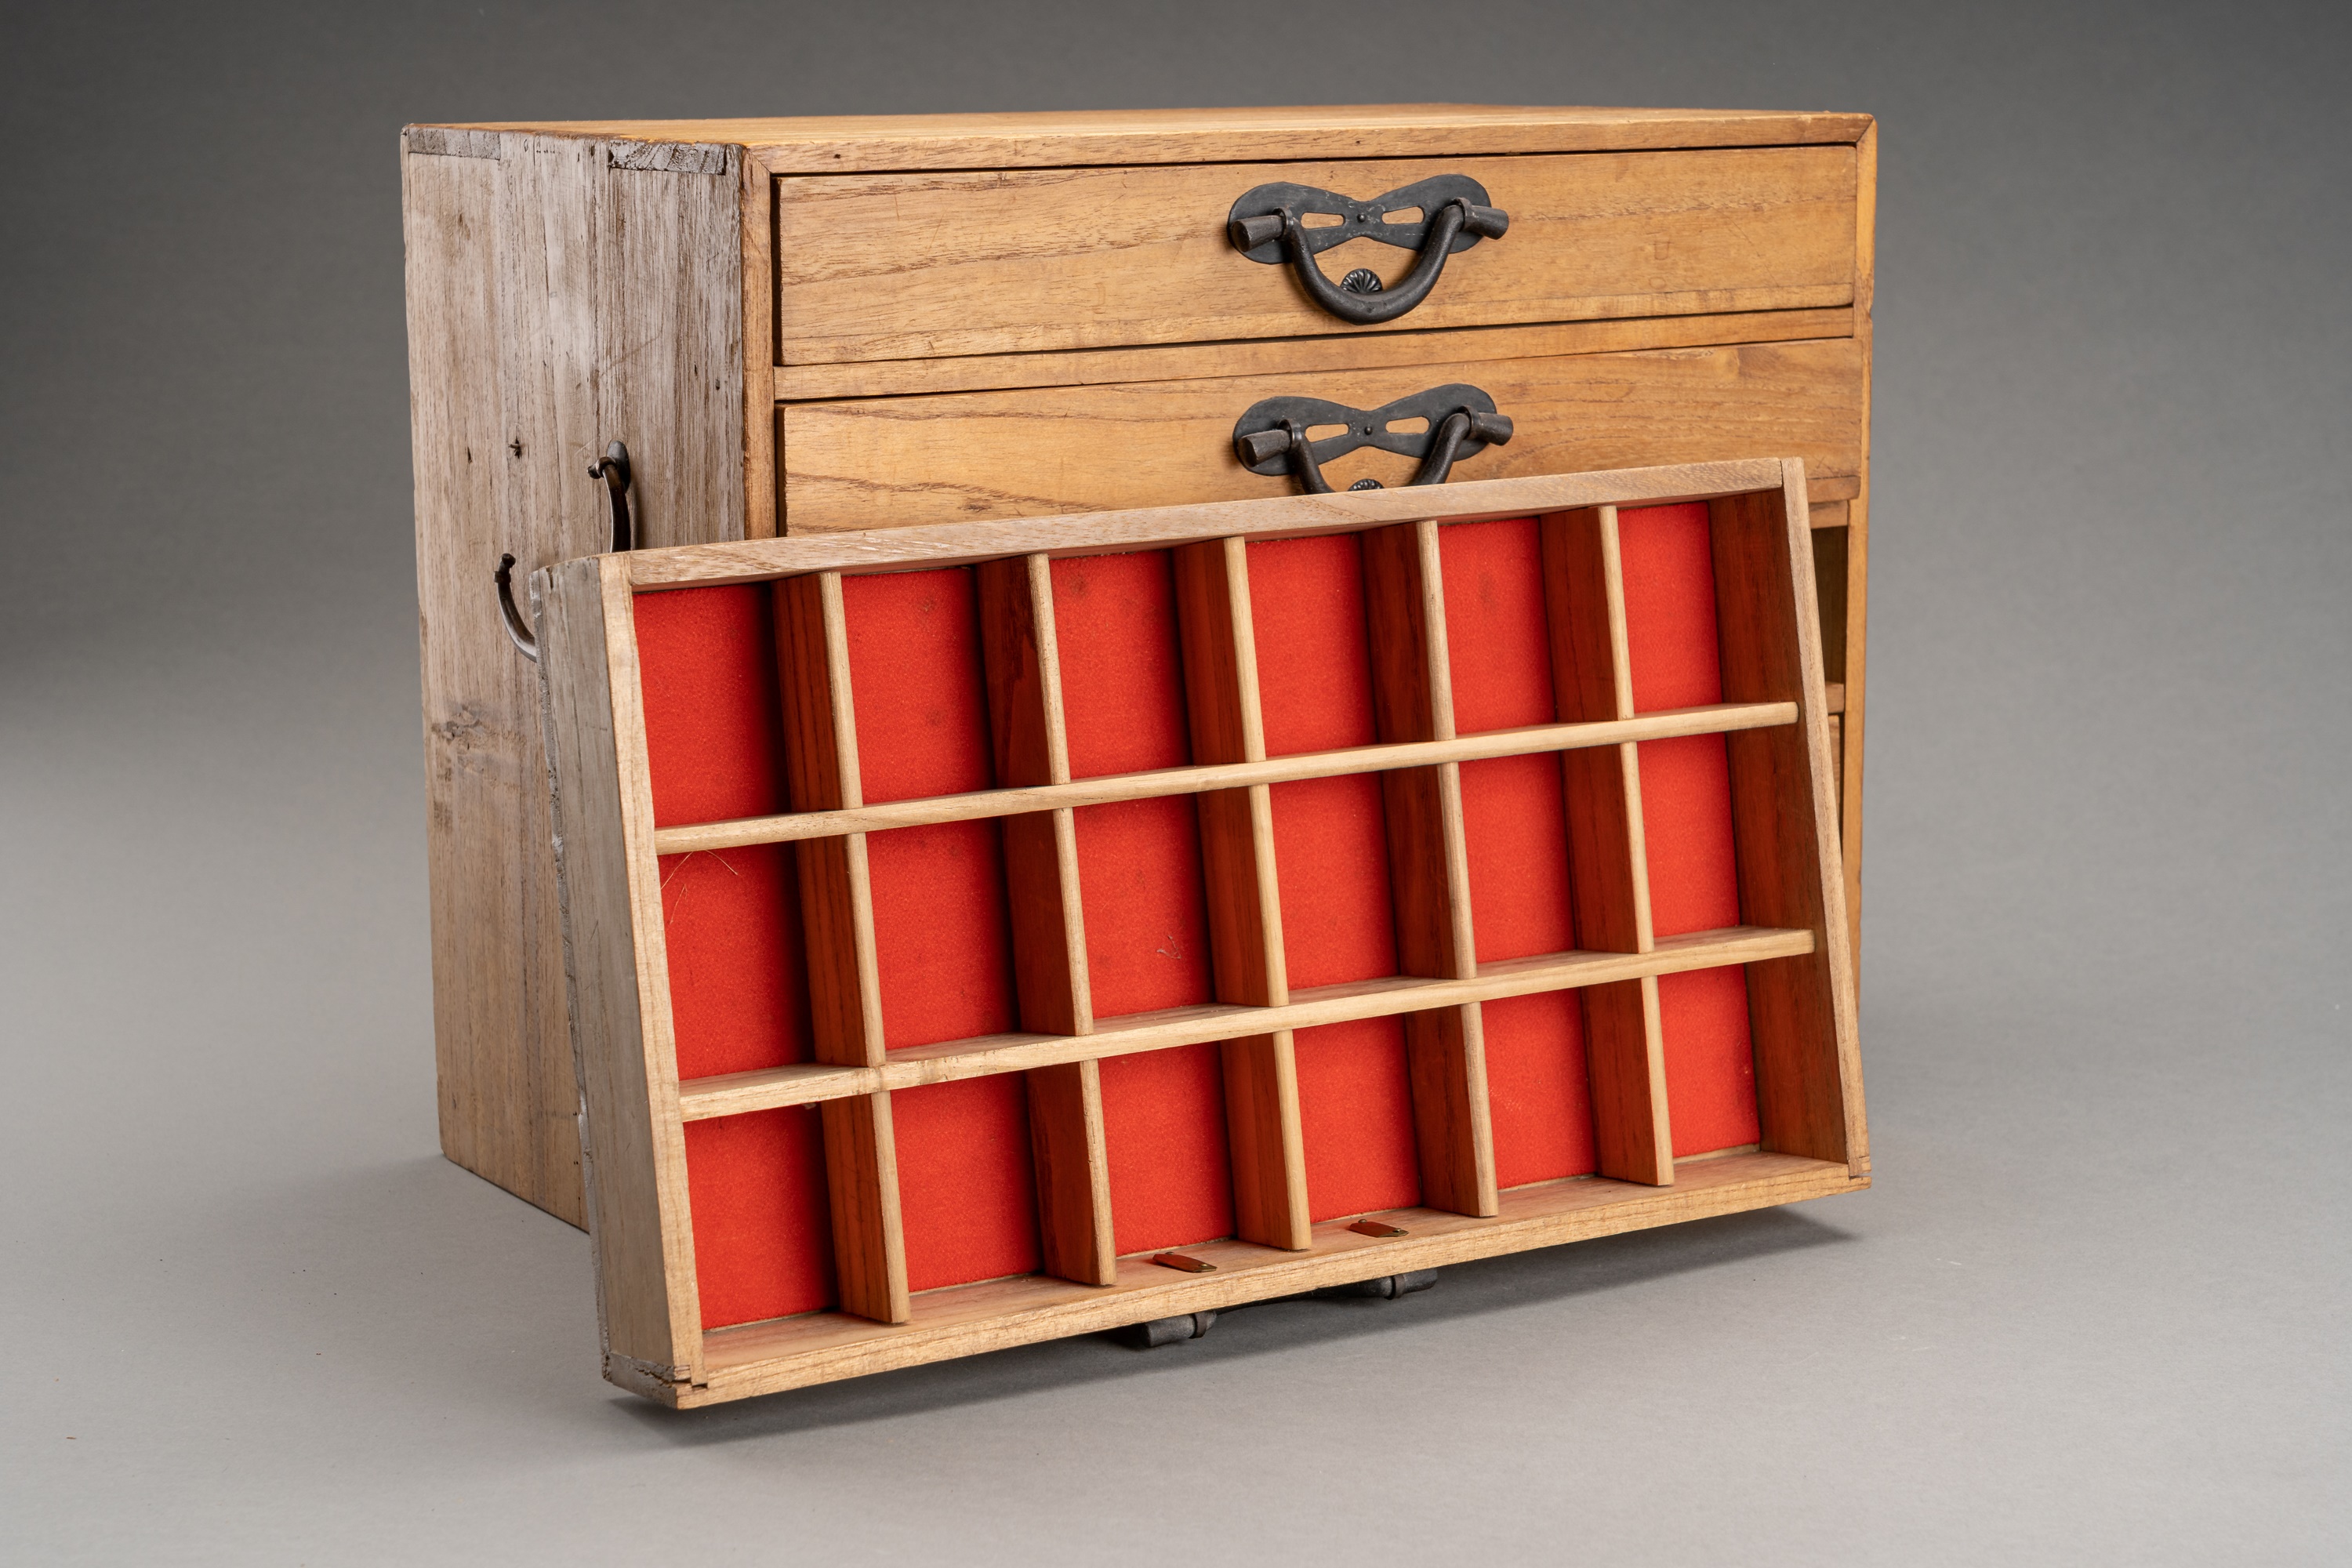 A WOODEN JAPANESE STORAGE BOX WITH 5 DRAWERS - Image 2 of 8